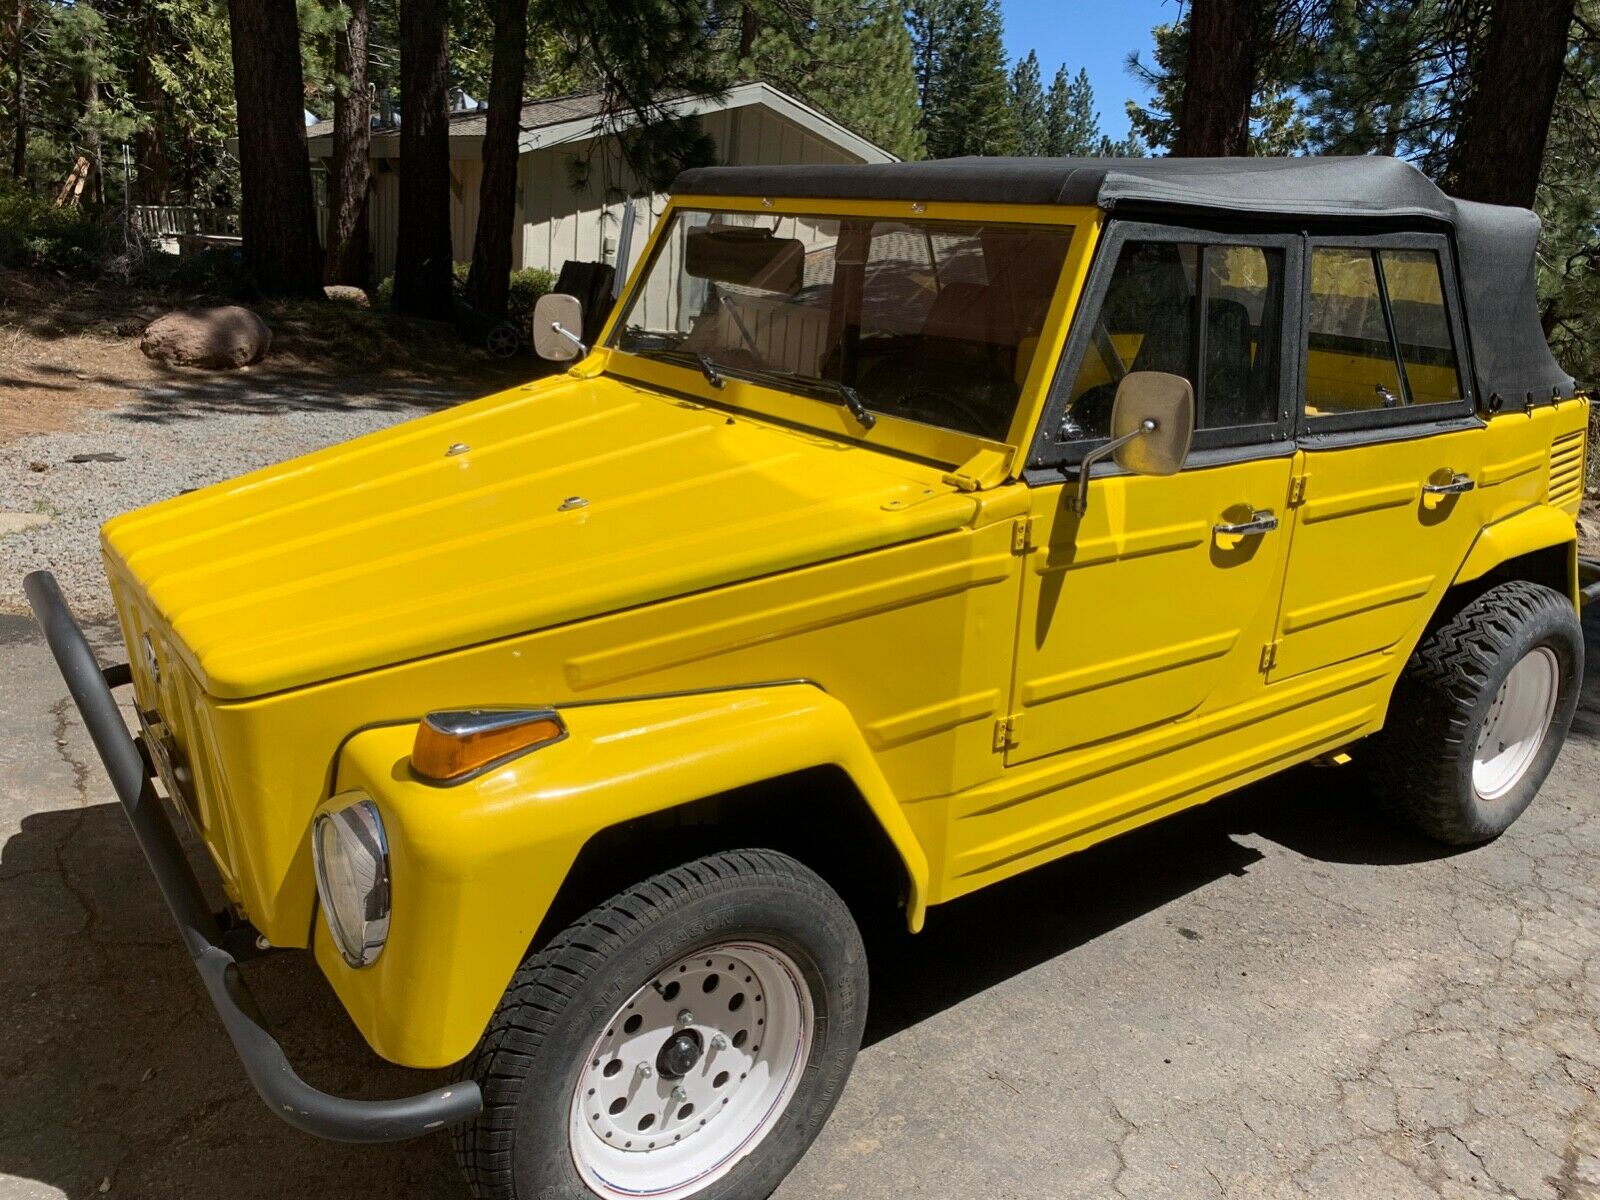 1973 Volkswagen Thing  This Thing Has All New Interior And Body Work Including 1800cc Engine